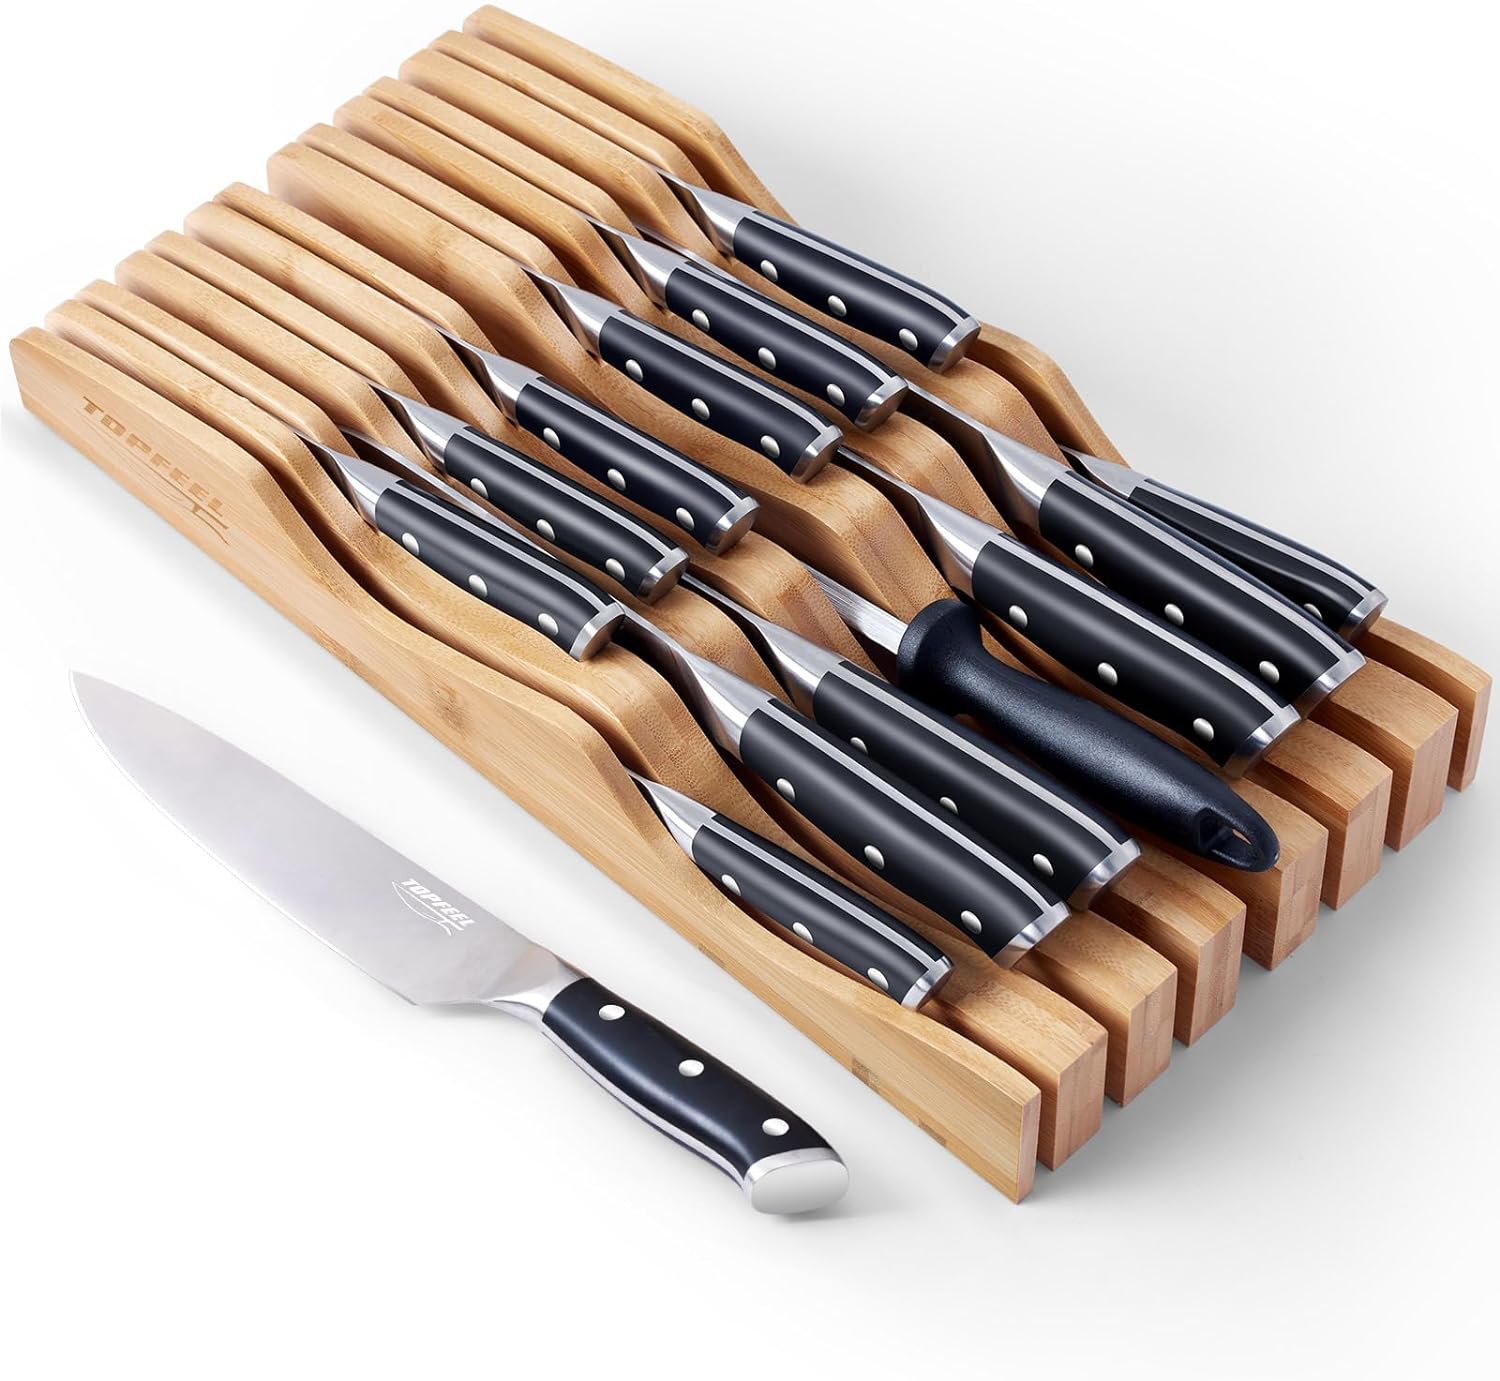 14 Pcs Kitchen Knife Set with In-Drawer Bamboo Knife Organizer- 7 Chef Knives,6 Serrated Steak Knives,Knife Sharpener,Ultra Sharp Chef Knife Set with Full-Tang Design